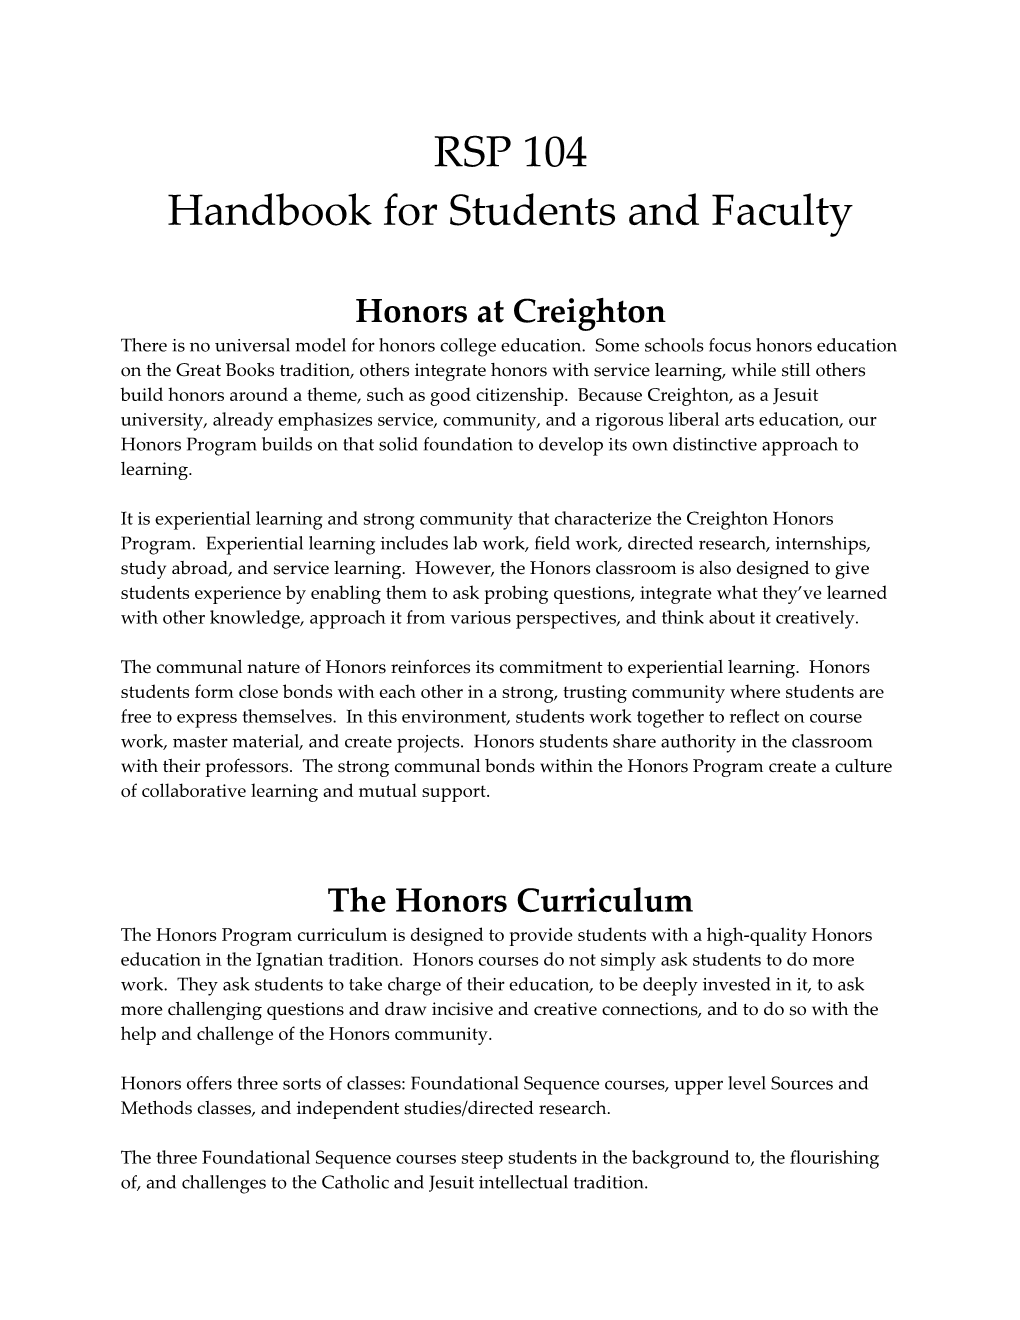 Handbook for Students and Faculty